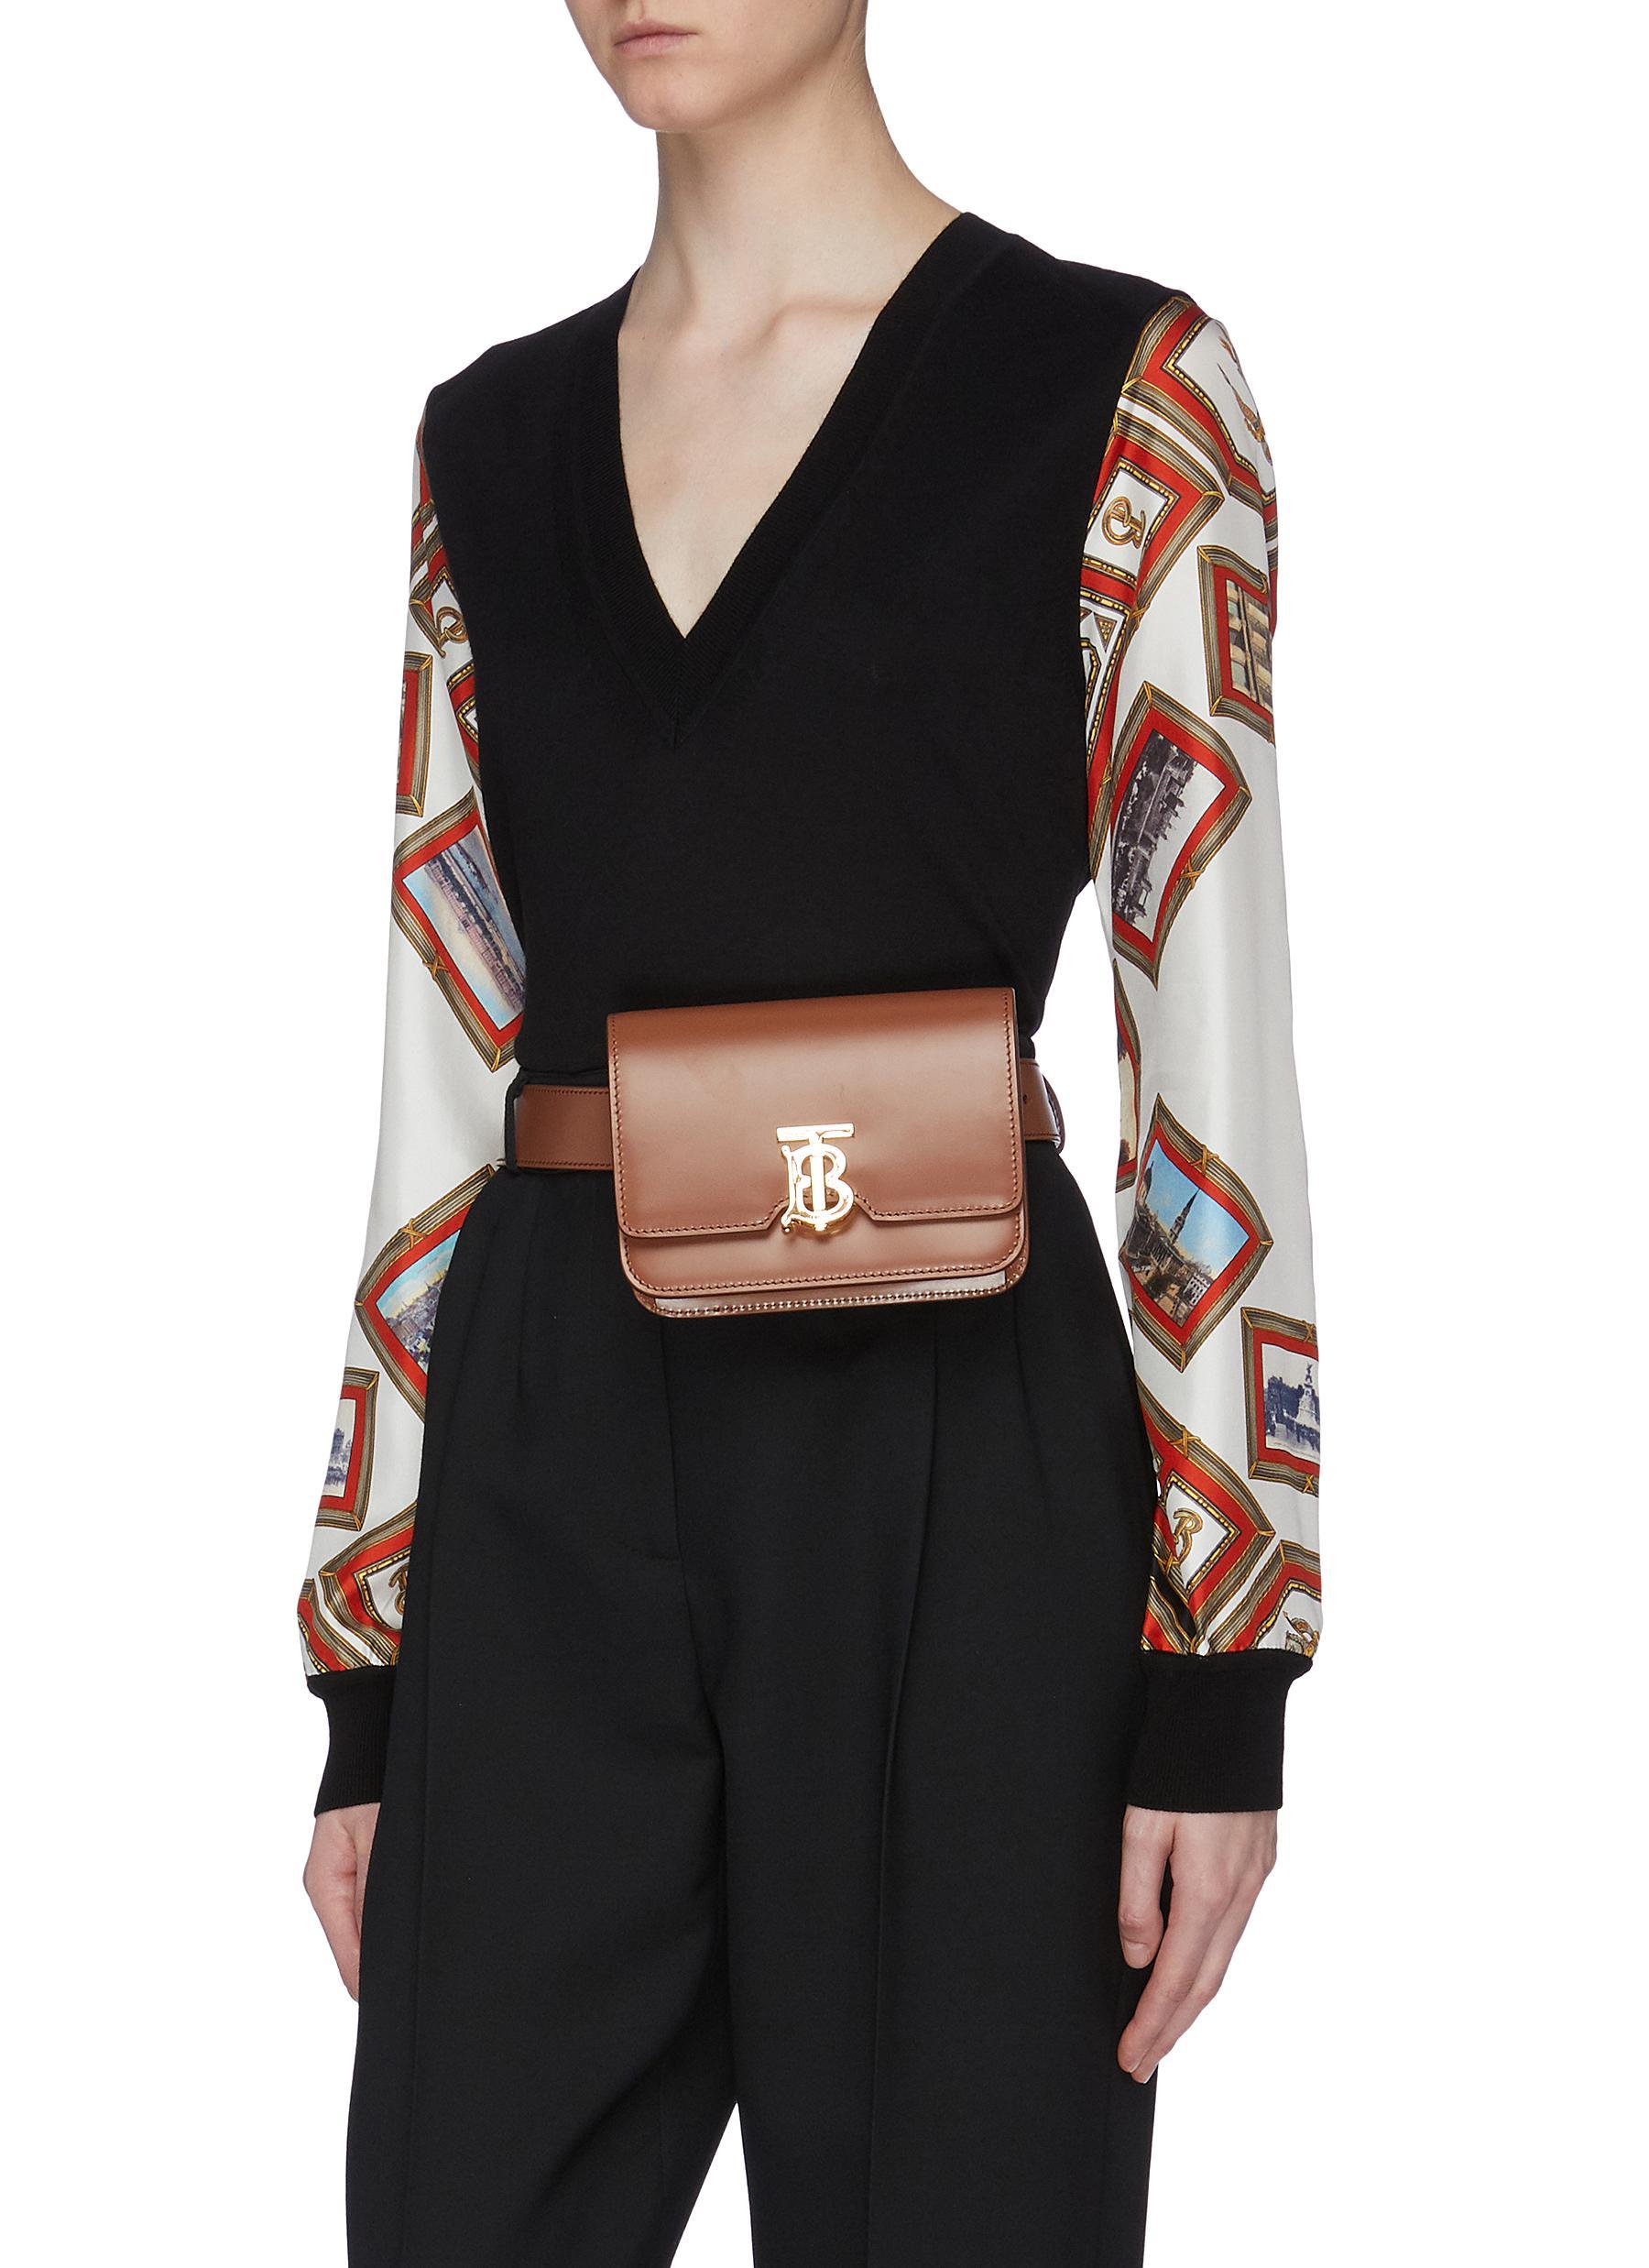 Burberry TB Monogram Buckle Reversible Logo Belt size S - $350 New With  Tags - From Kaka